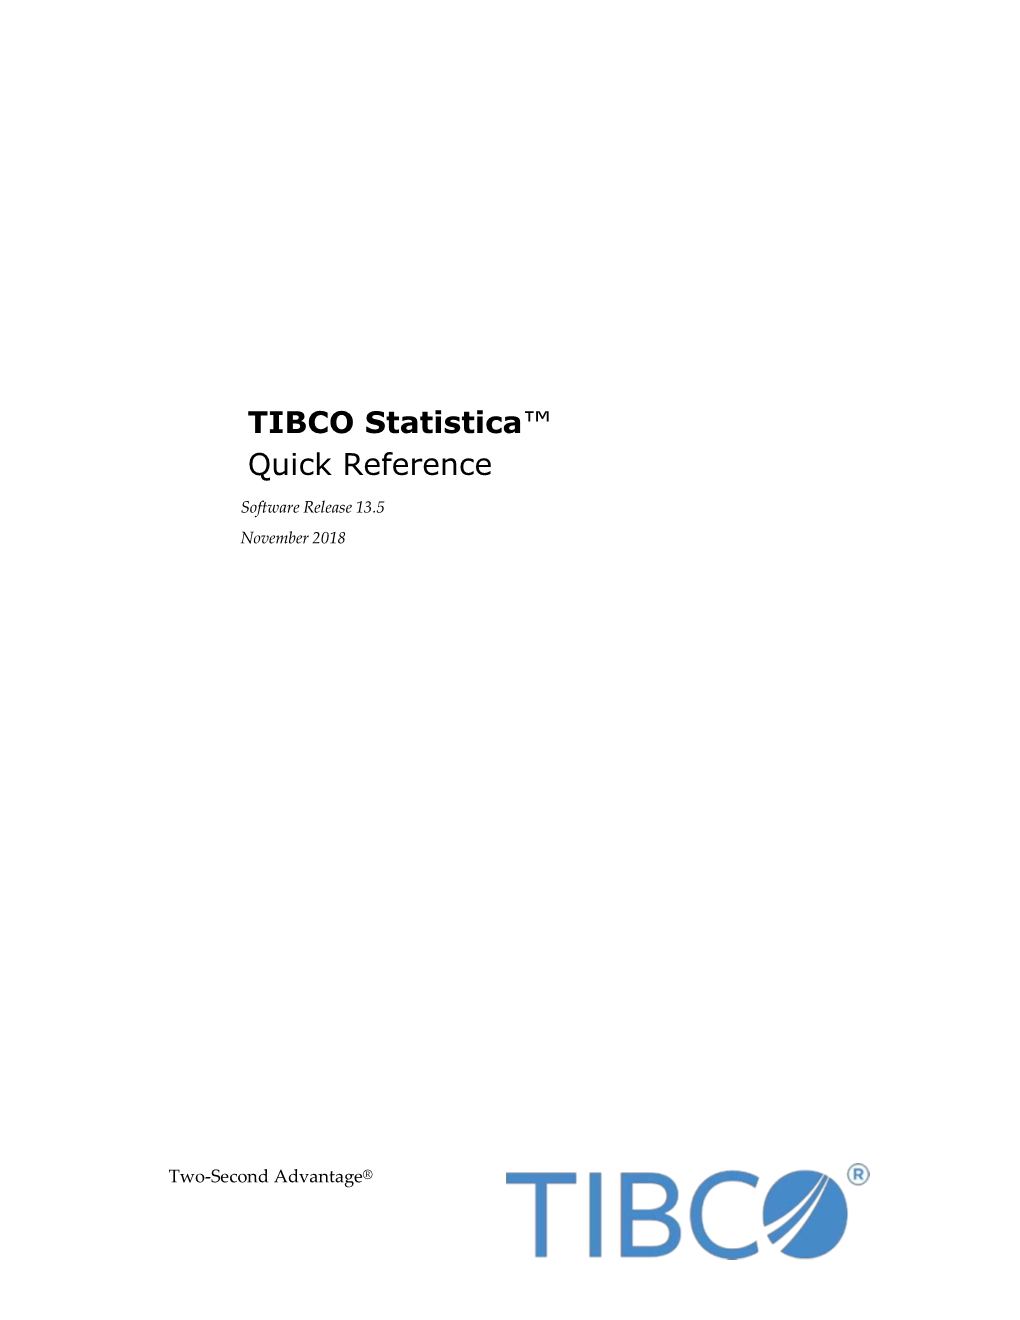 TIBCO Statistica™ Quick Reference Software Release 13.5 November 2018